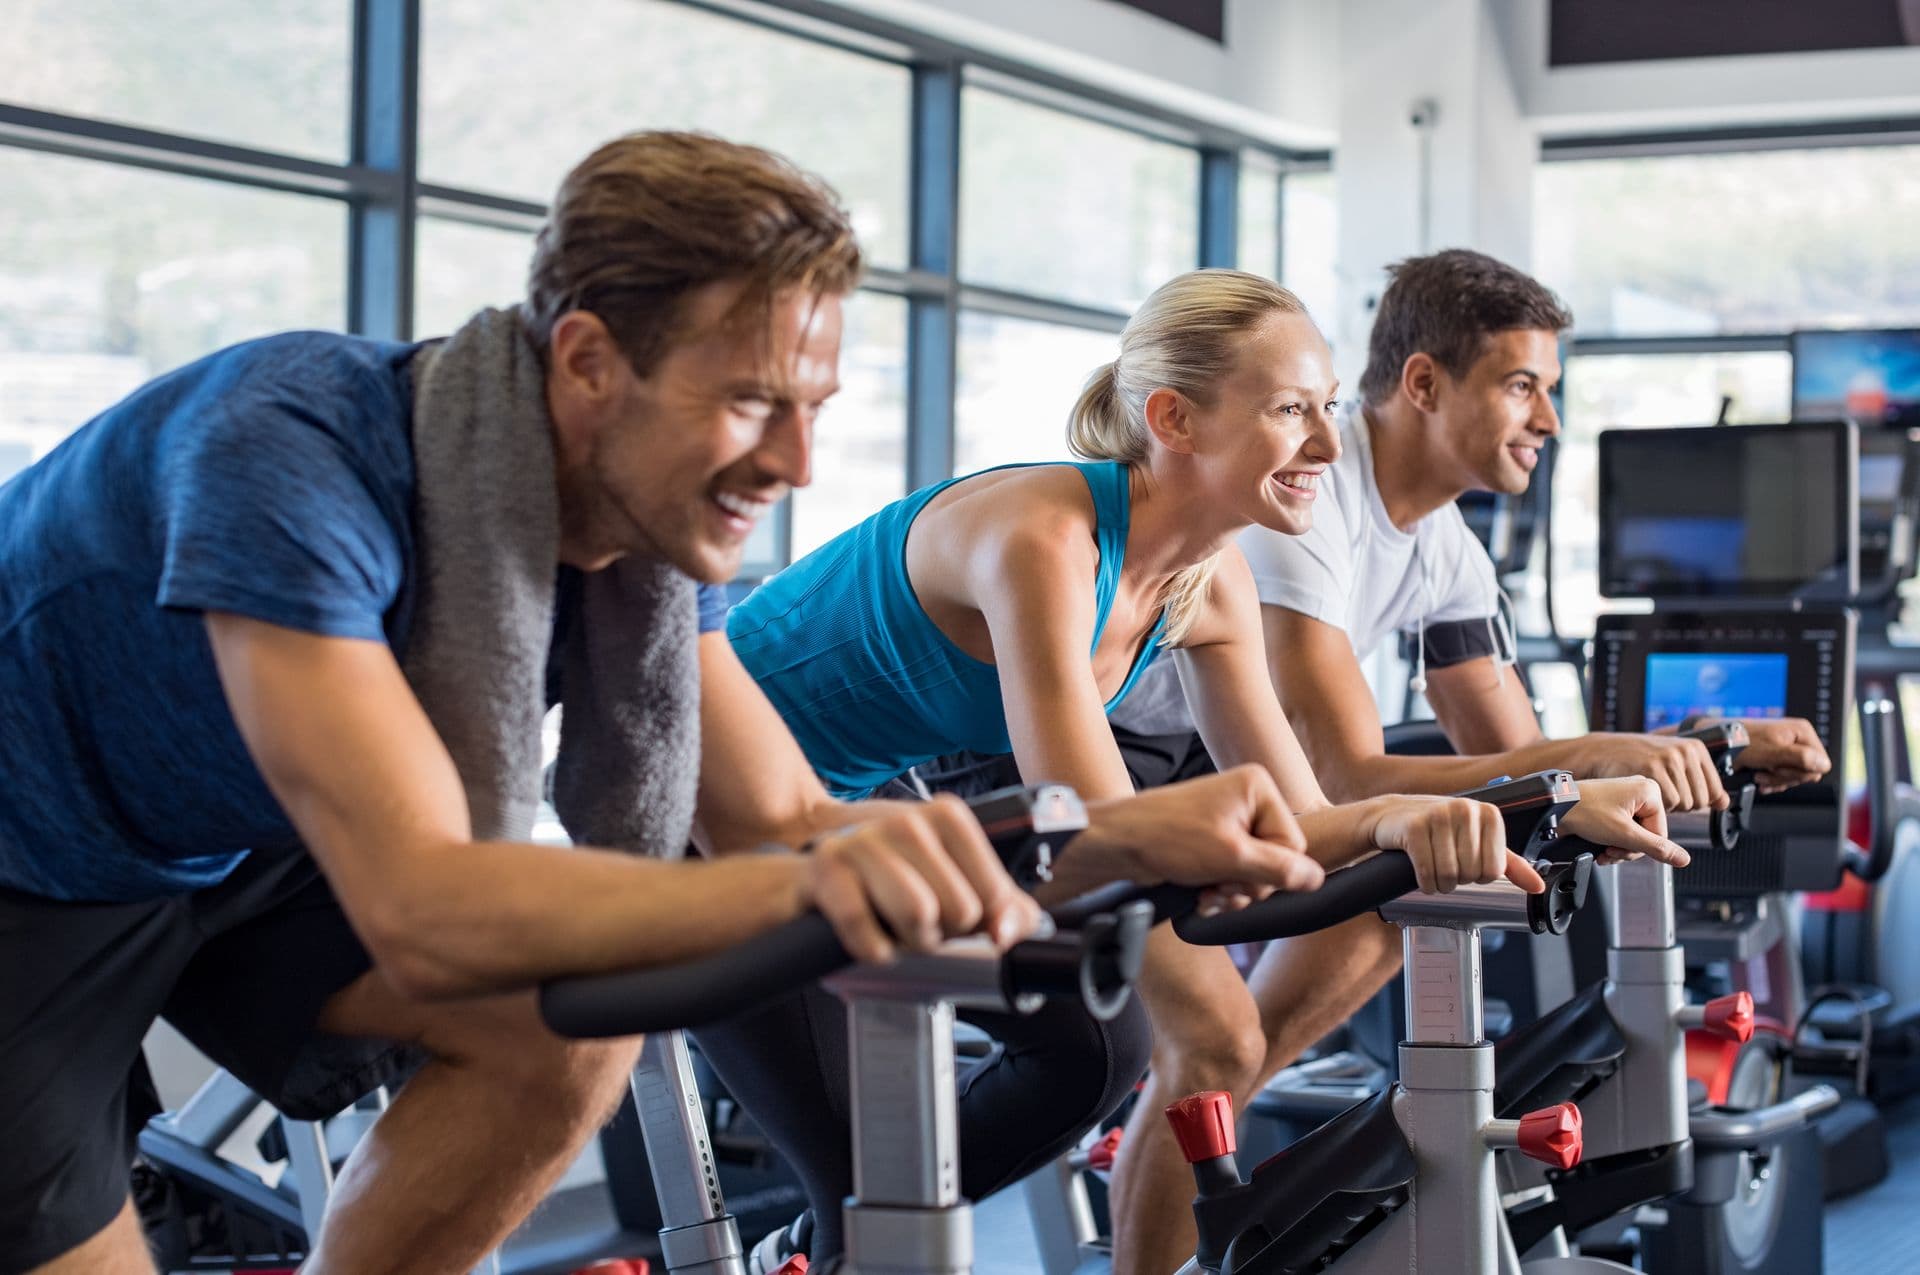 Exercise bikes and cross trainers &#8211; a comprehensive guide to workout equipment